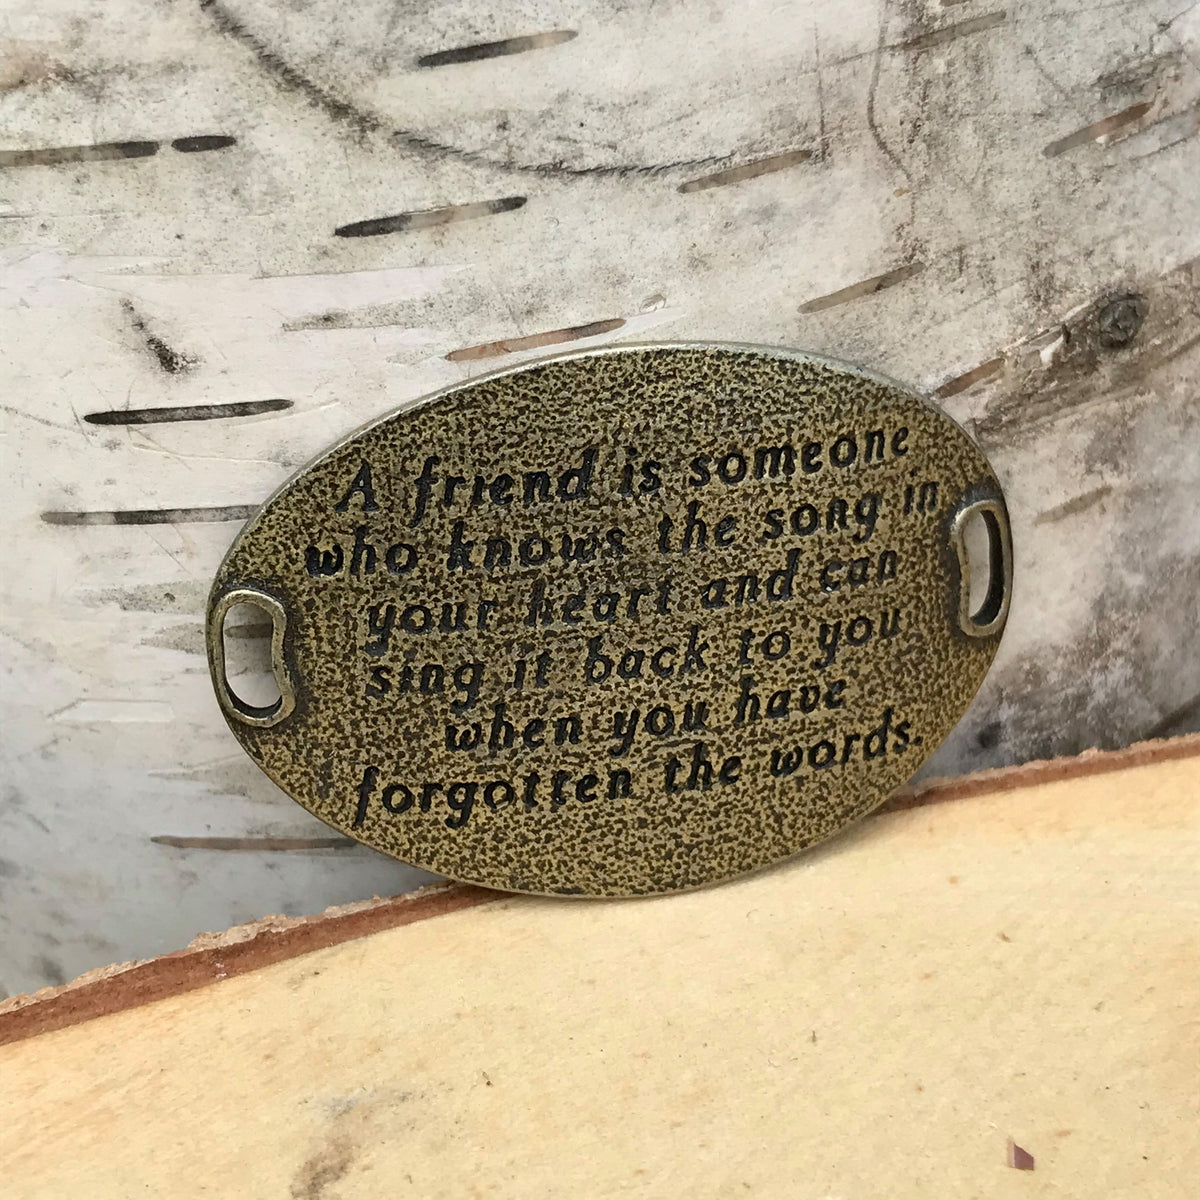 "A friend is someone who knows the song in your heart and can sing it back to you when you have forgotten the words." (brass)